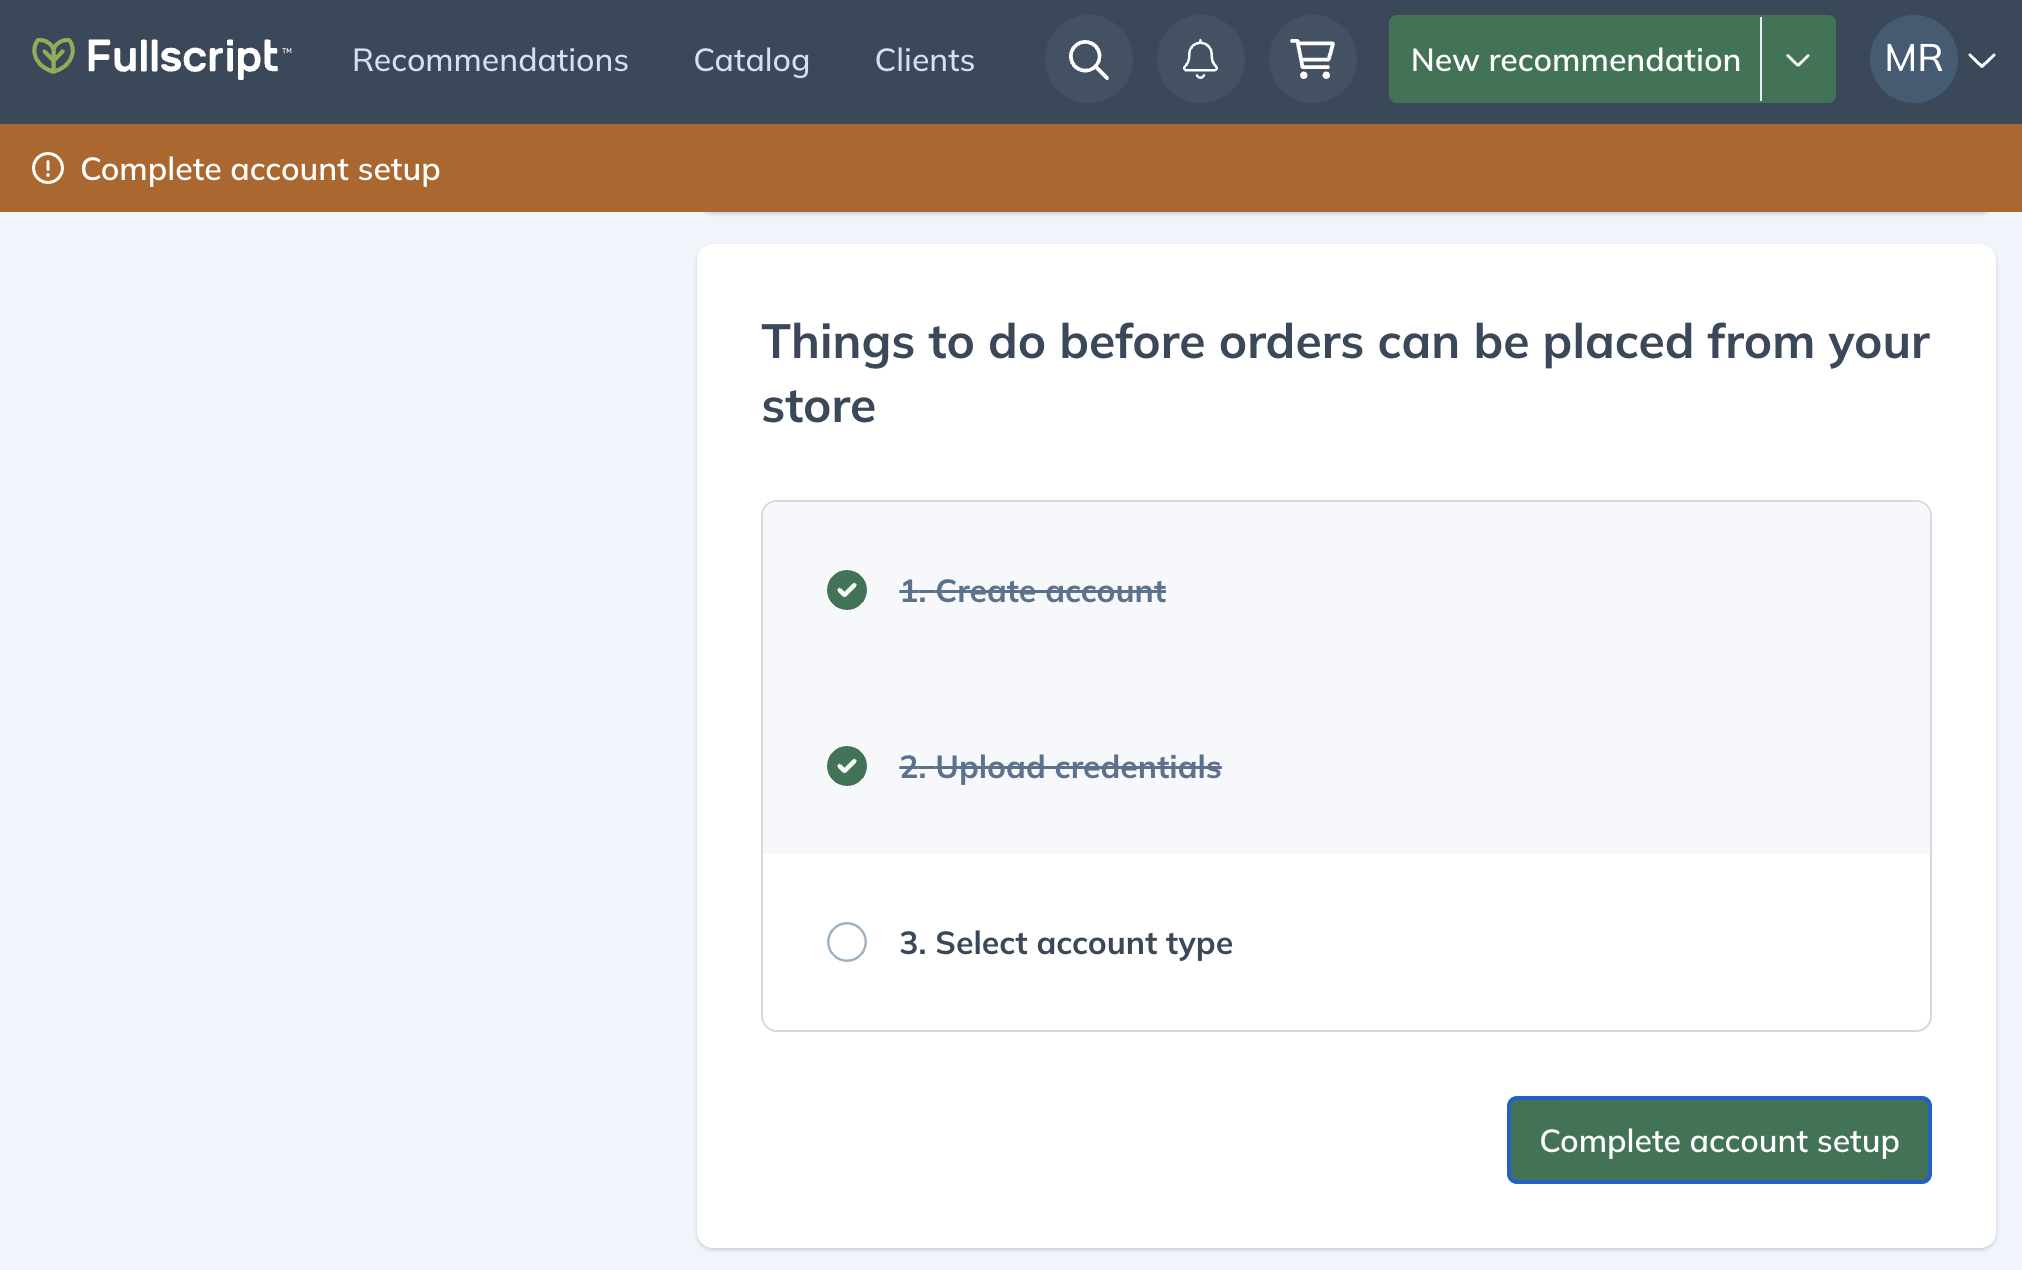 Select the 'Complete account setup' banner or the next task in the checklist to get your account order ready.